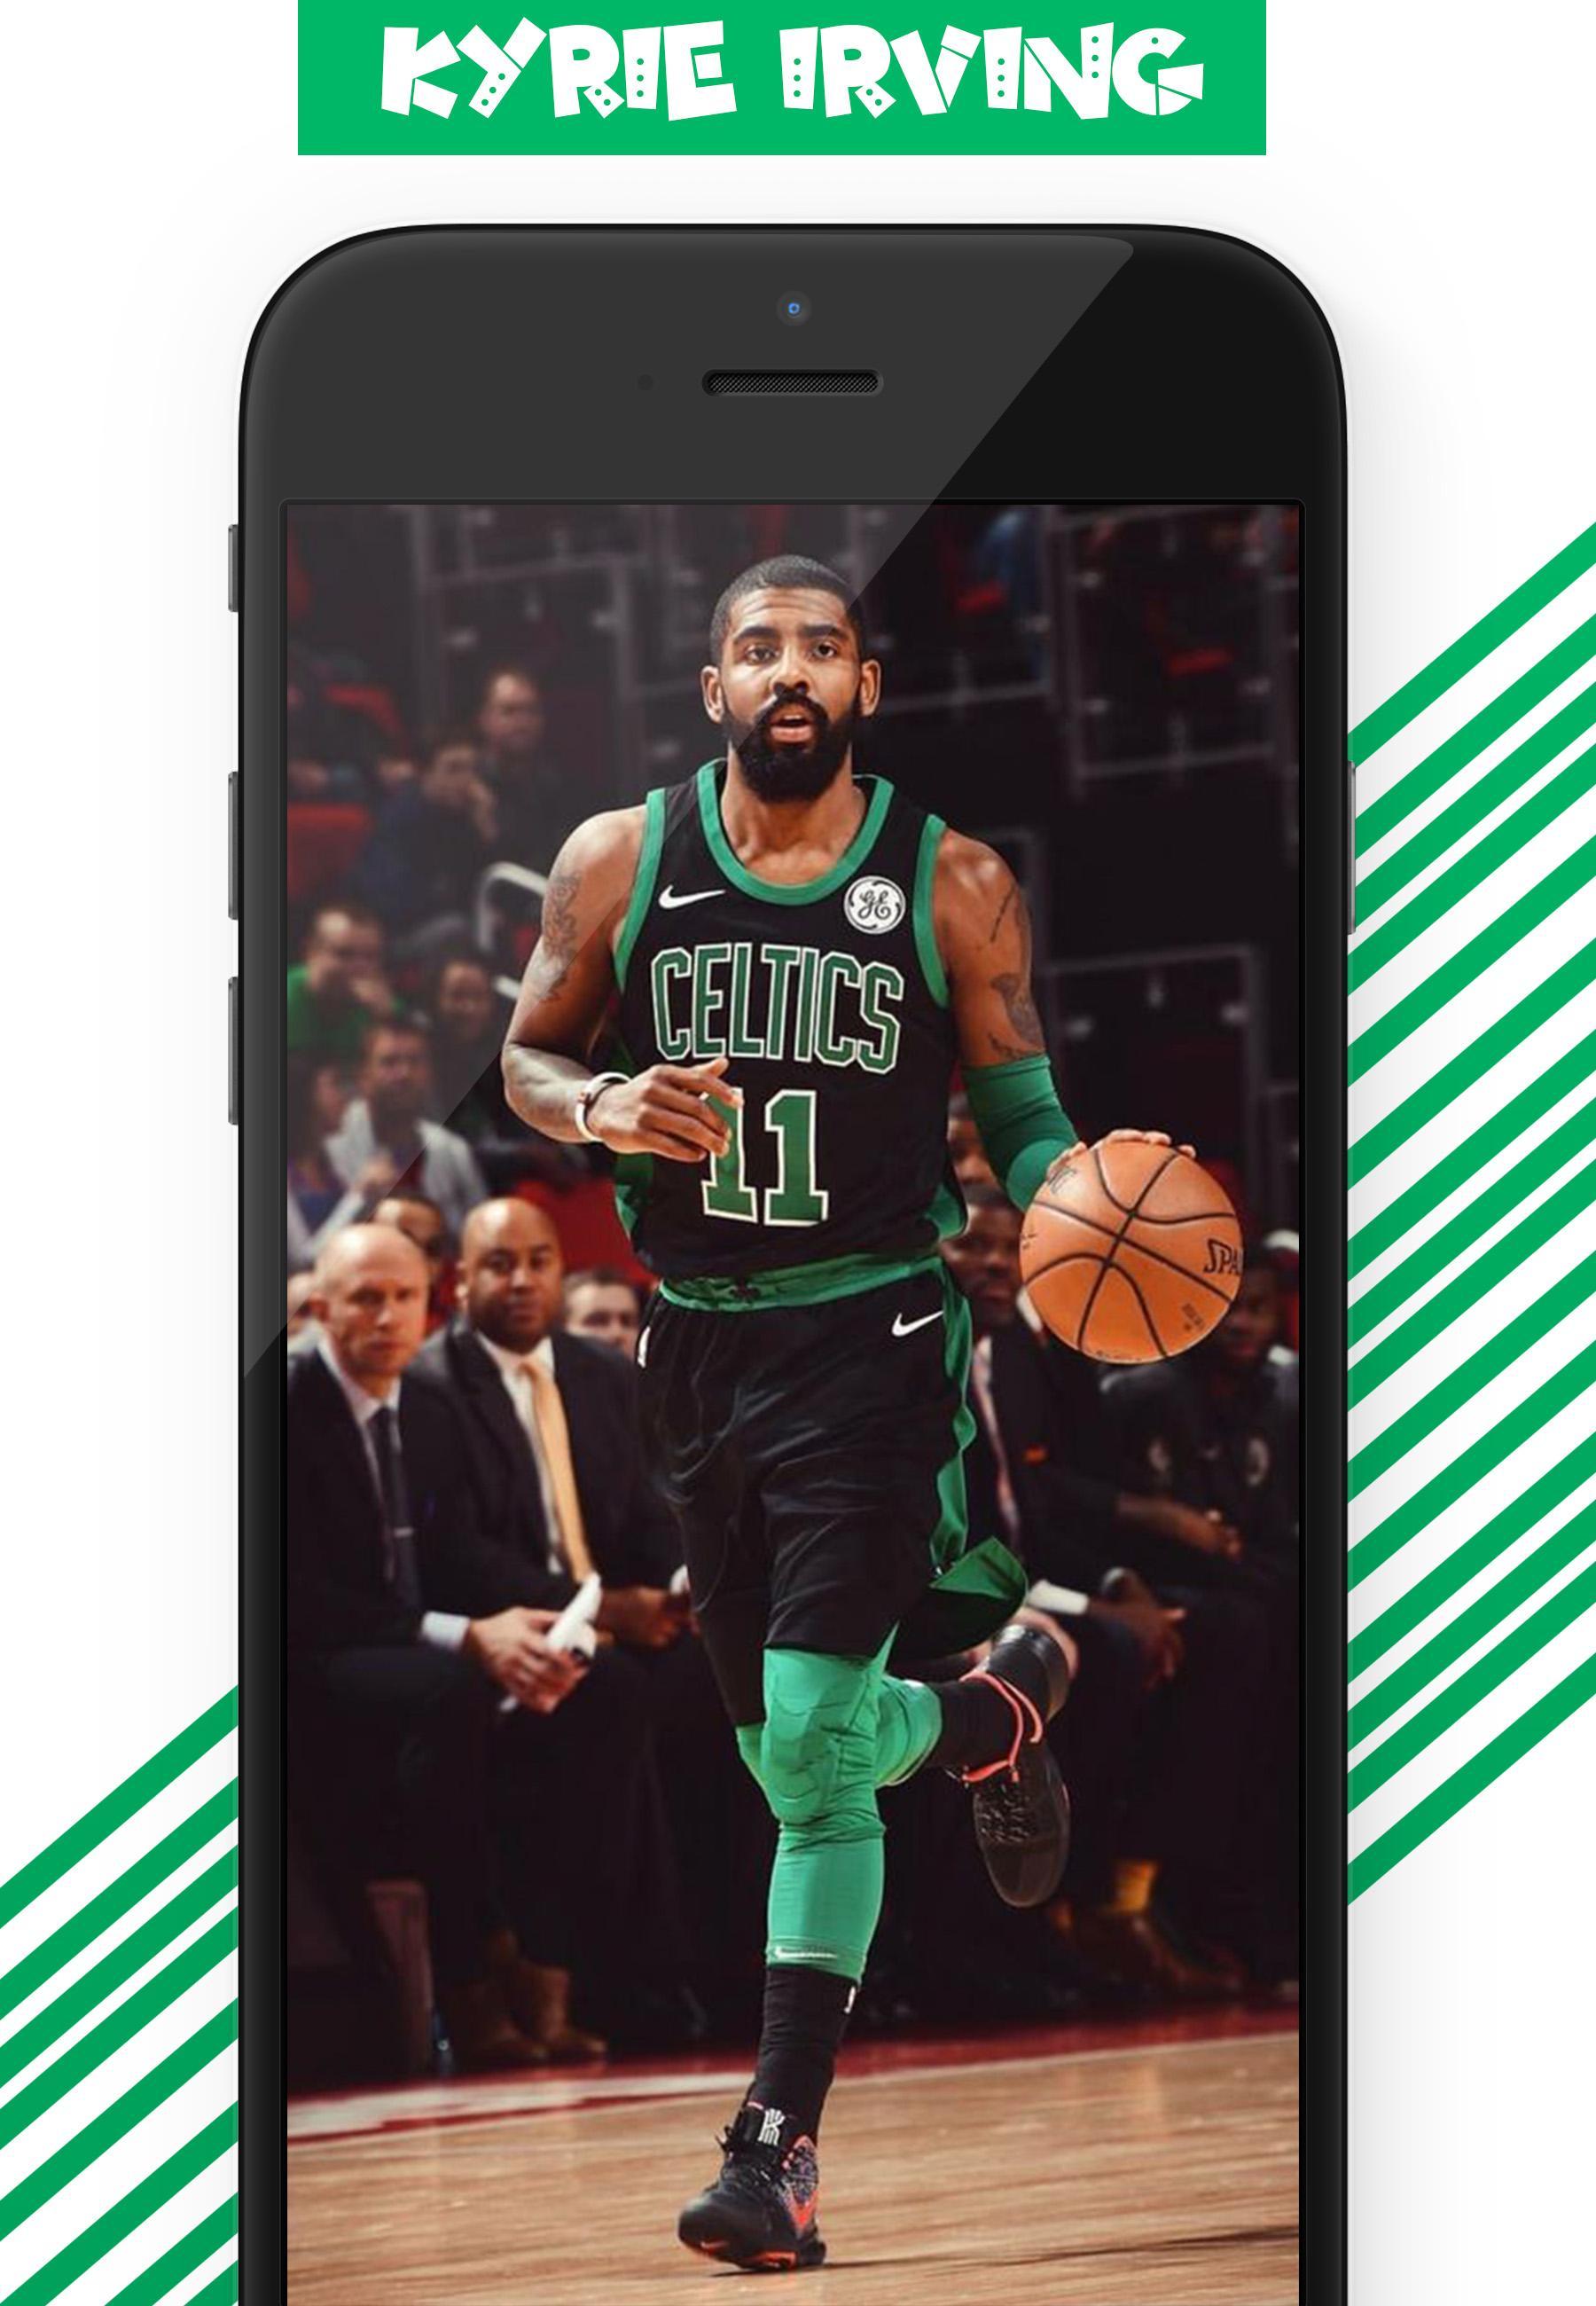 Kyrie Irving Wallpaper Hd For Android Apk Download